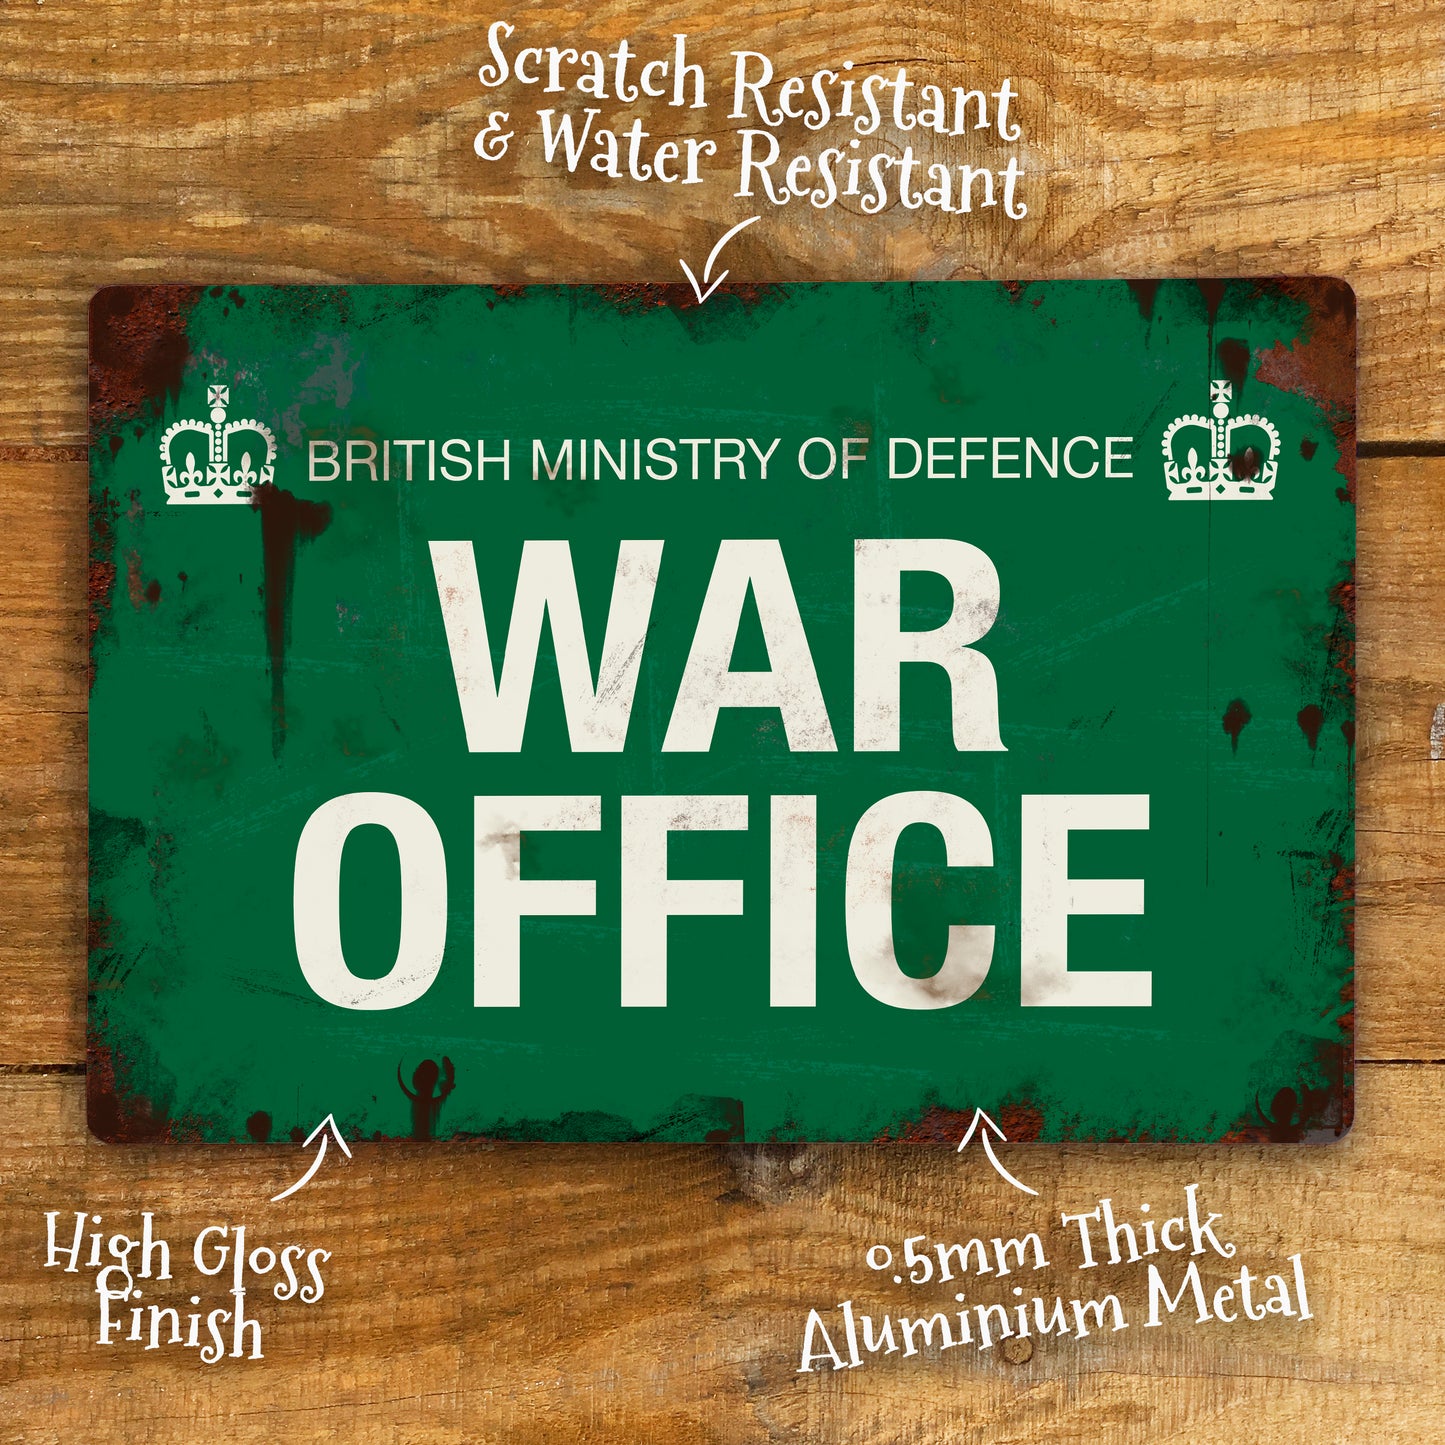 This vintage style world war 2 wartime War Office sign is a great gift idea for any Man Cave, bedroom or office. The sign is made from 0.5mm thick aluminium and is 100% waterproof. details